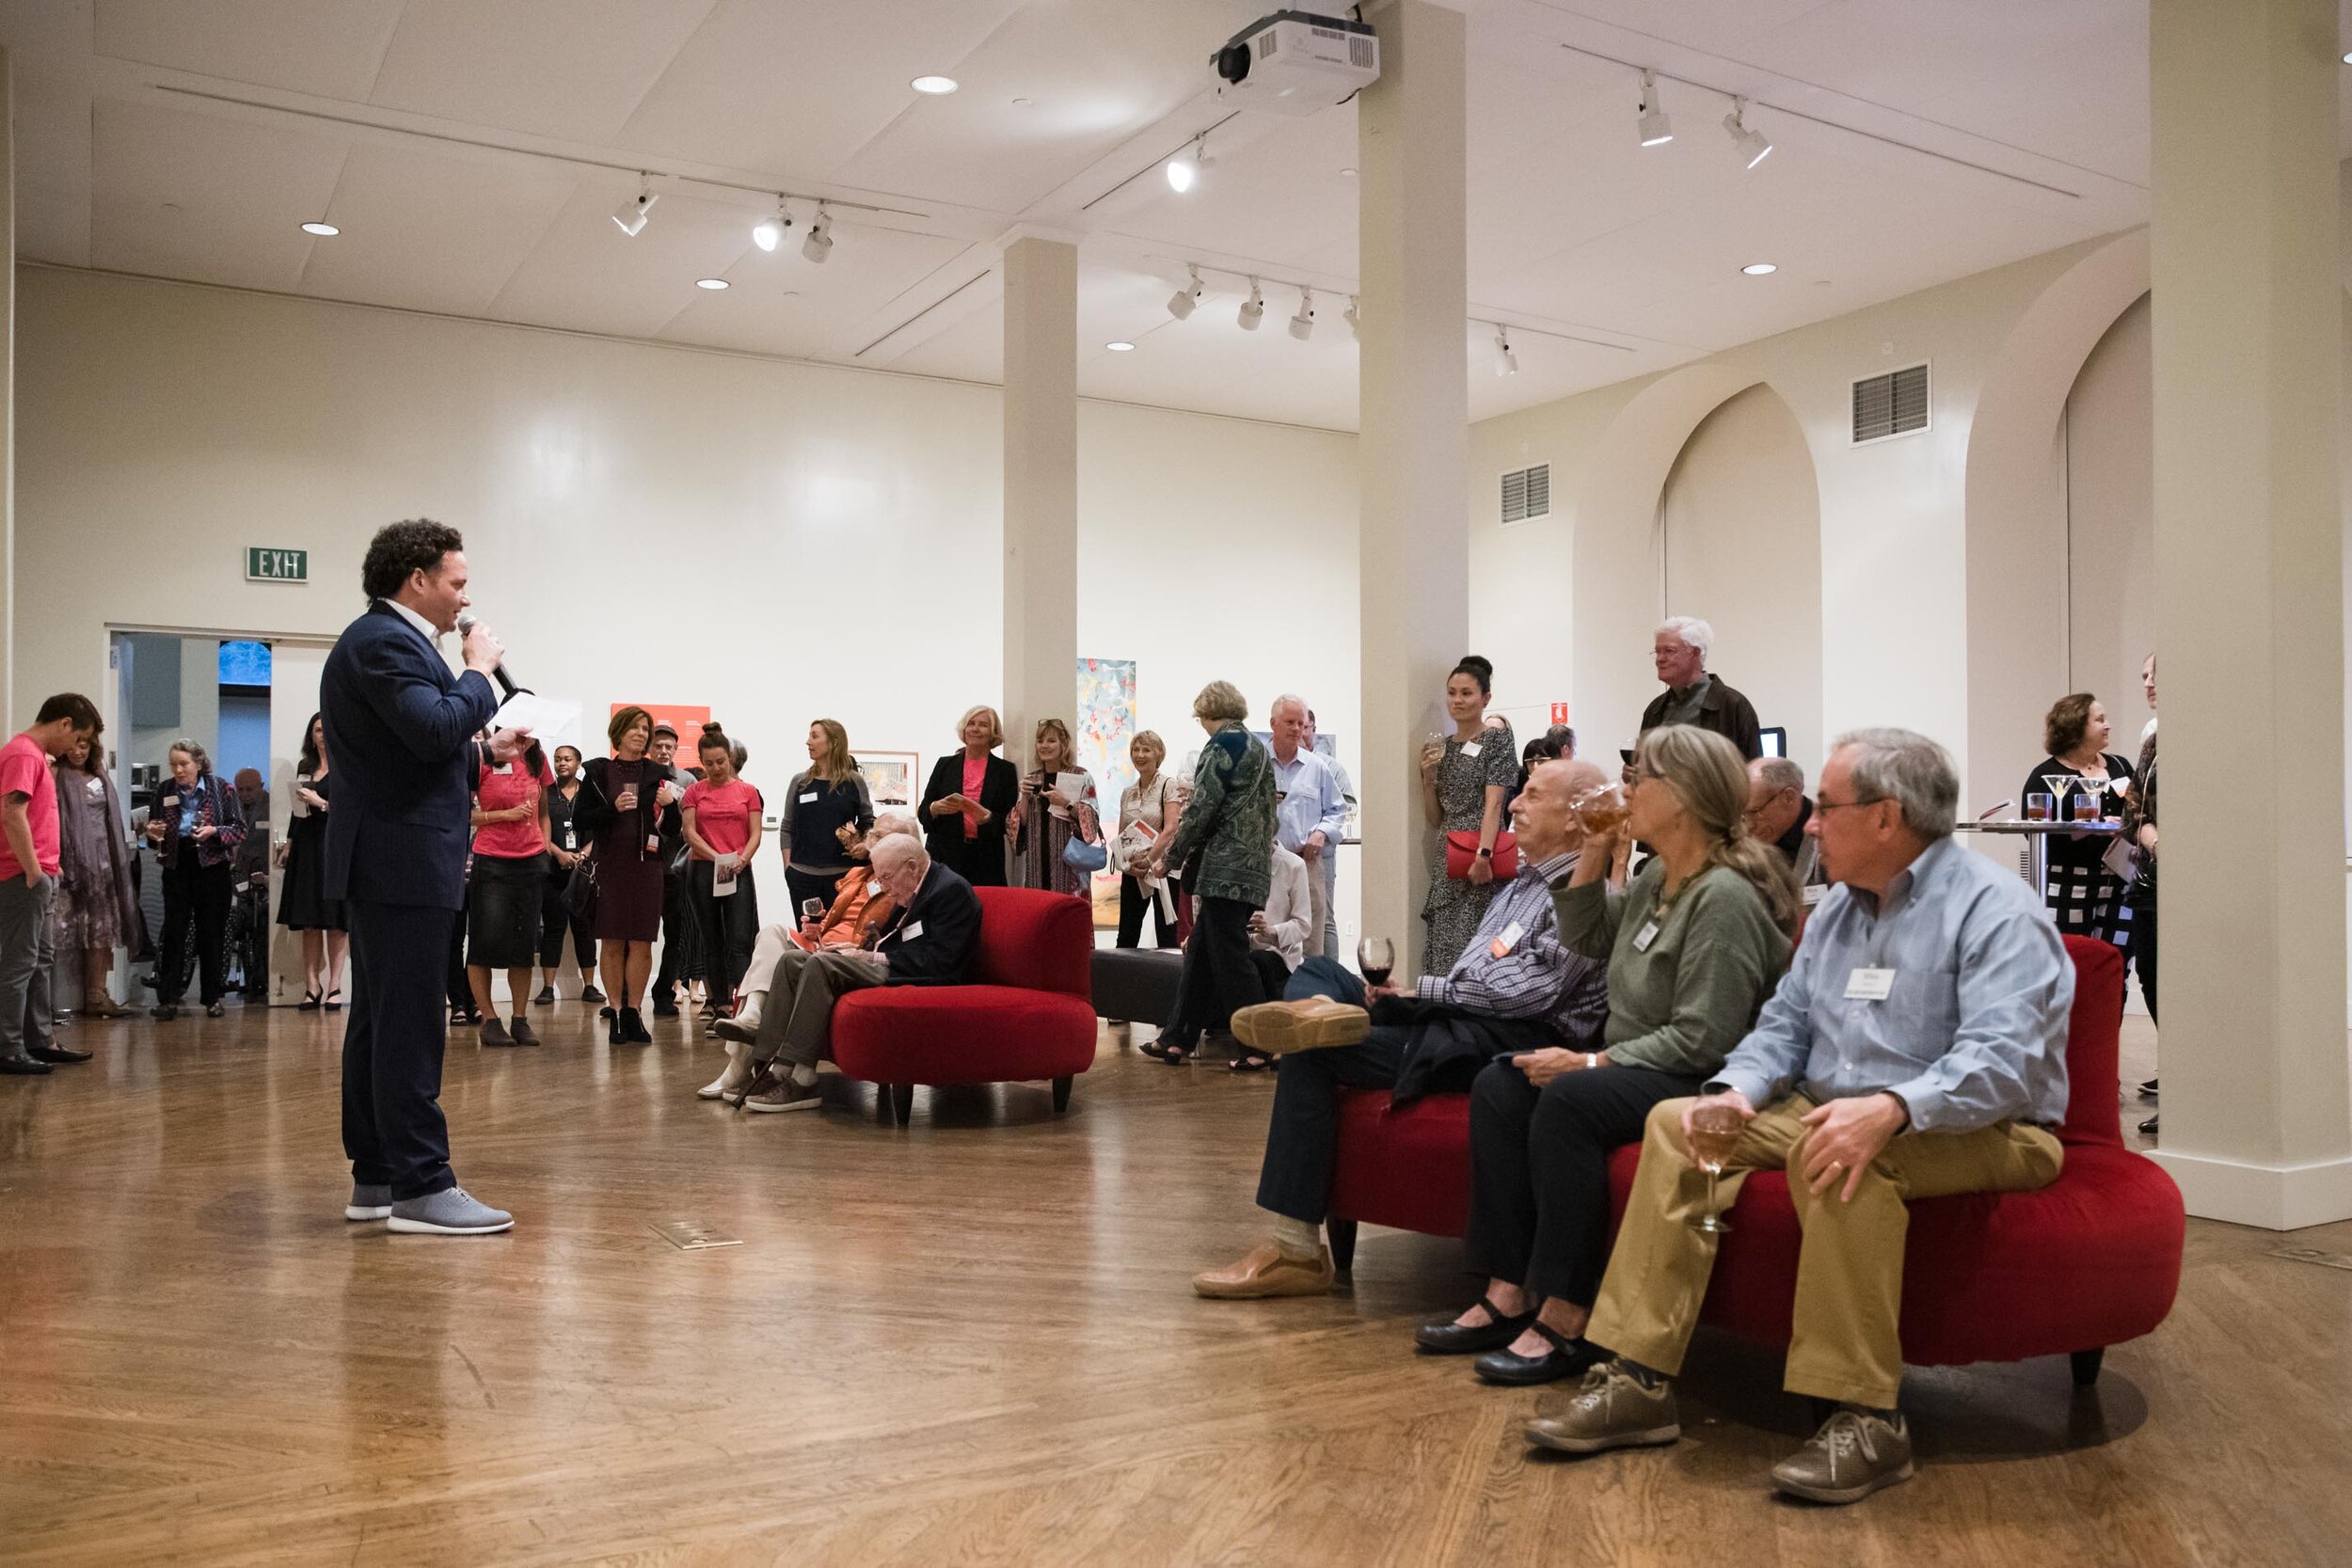 91_GalaAuctionPreview_9.16.19_photo_SharonKenney.jpg